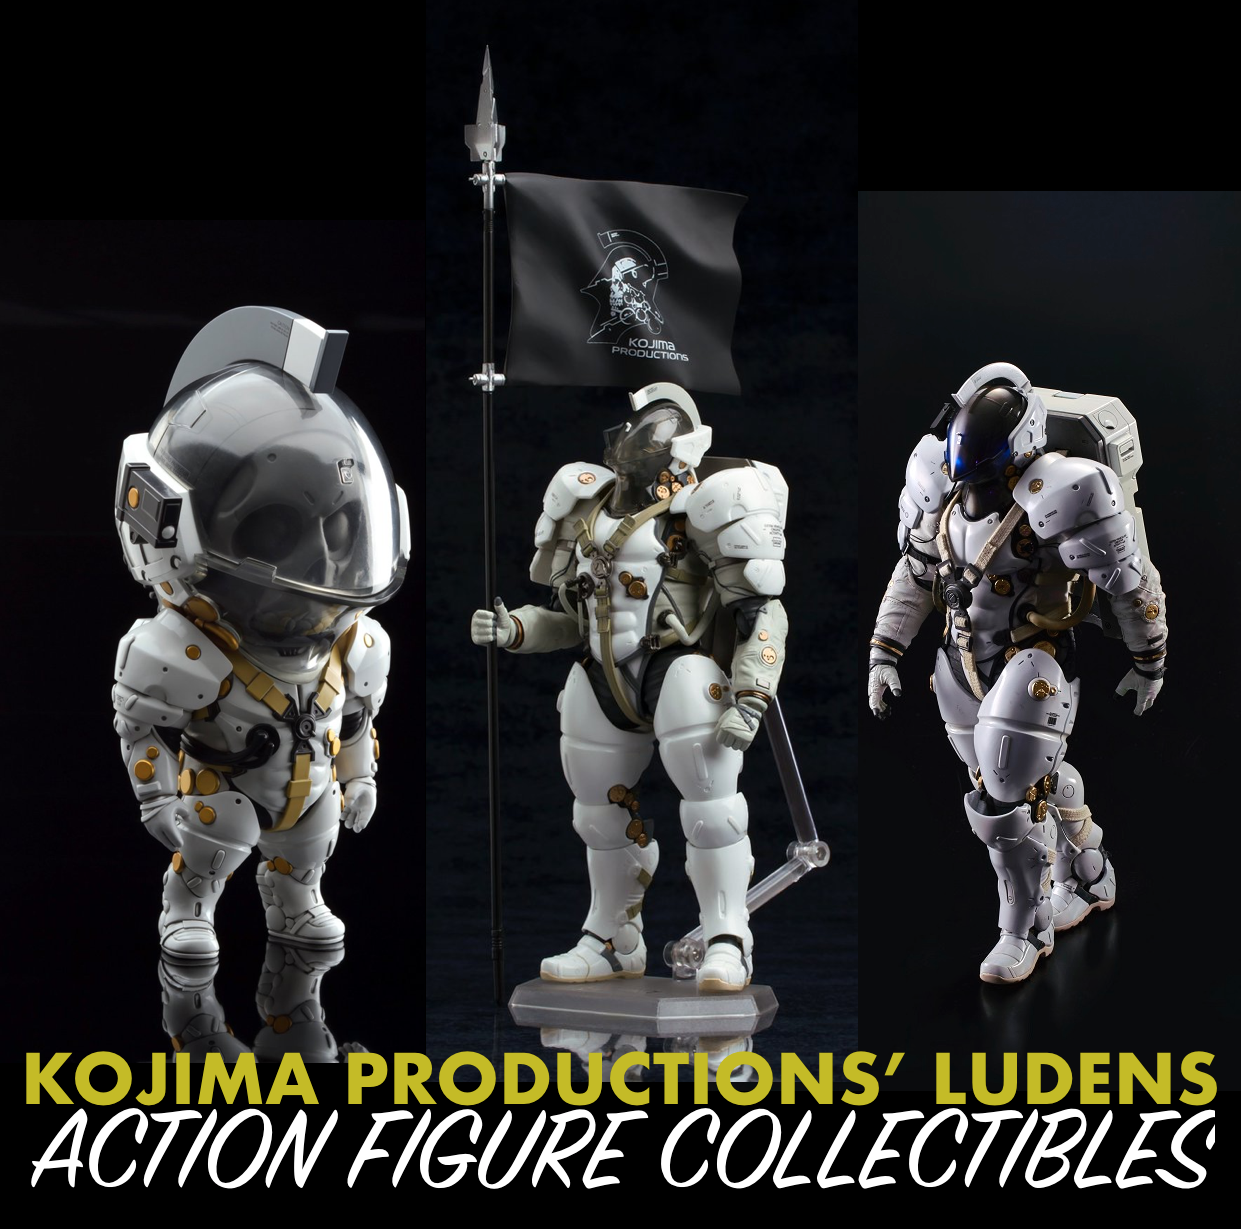 Kojima Productions' “LUDENS” Action Figure Collectibles On Pre